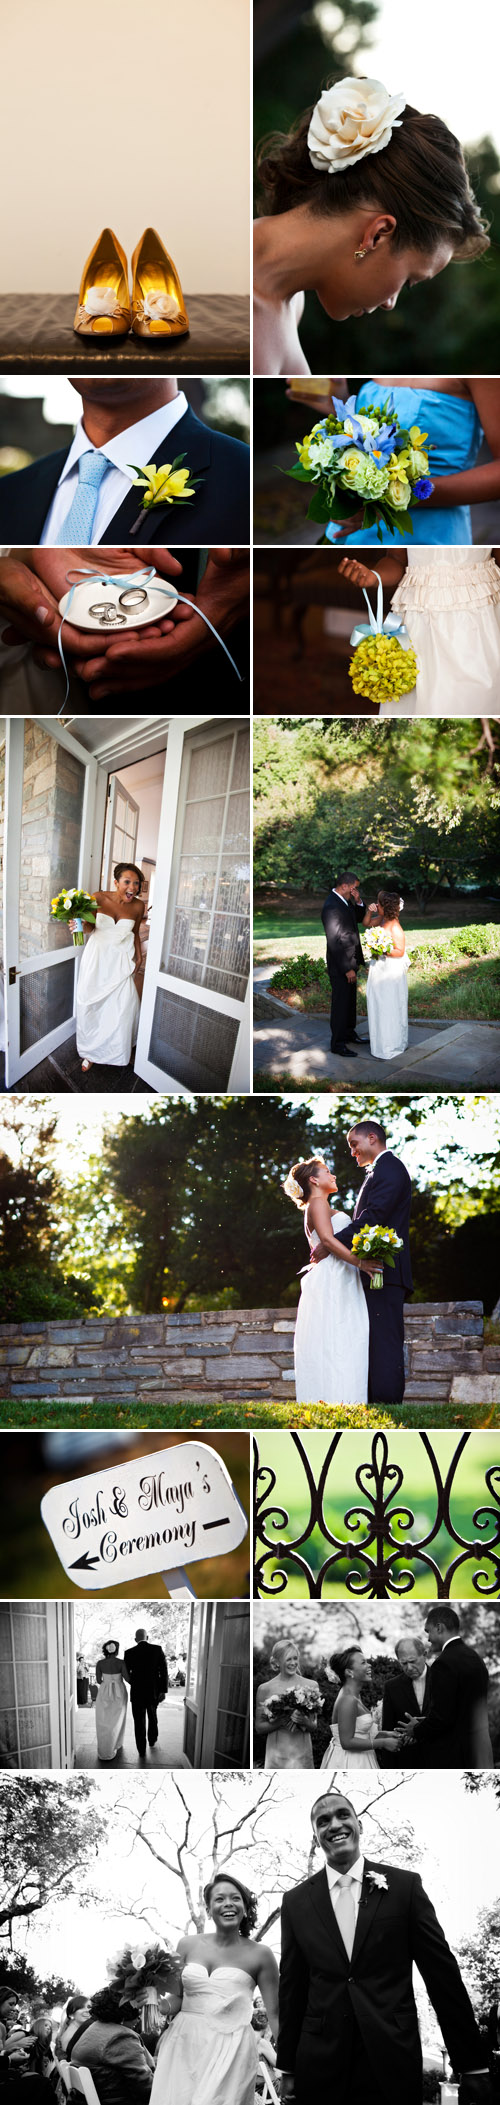 charming garden wedding in Rockville, MD, photography by Holland Photo Arts